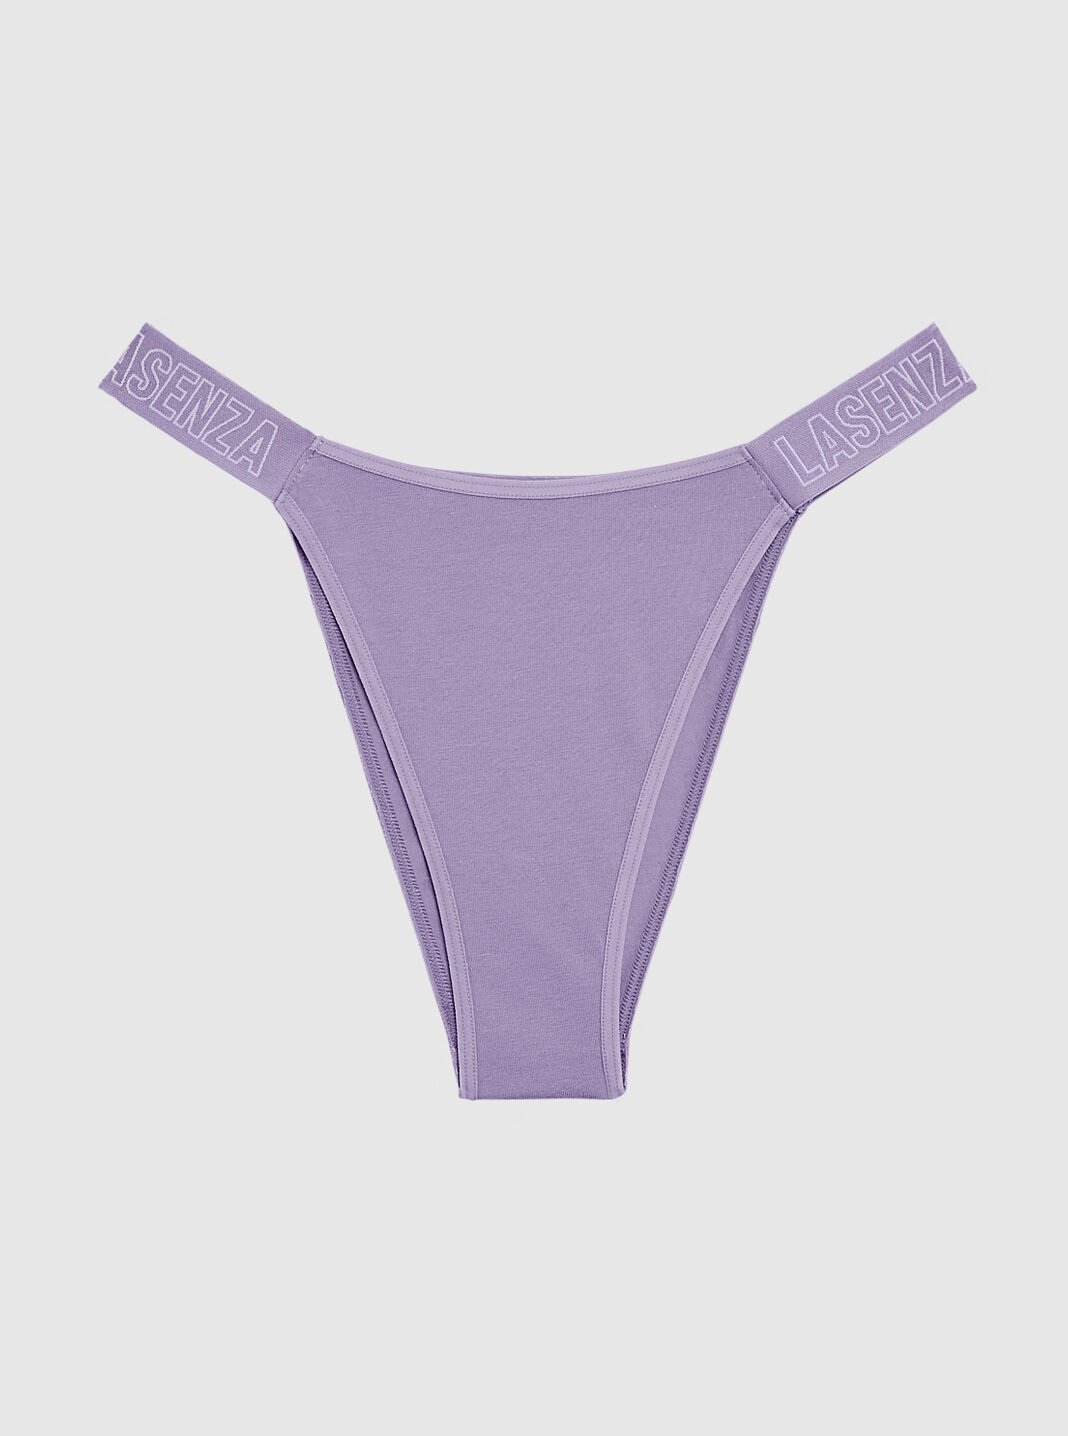 Gianna Cotton Violet Panties, From Cheeky Cuts to Briefs, 30 Pairs Of  Underwear We Love from Small Lingerie Brands